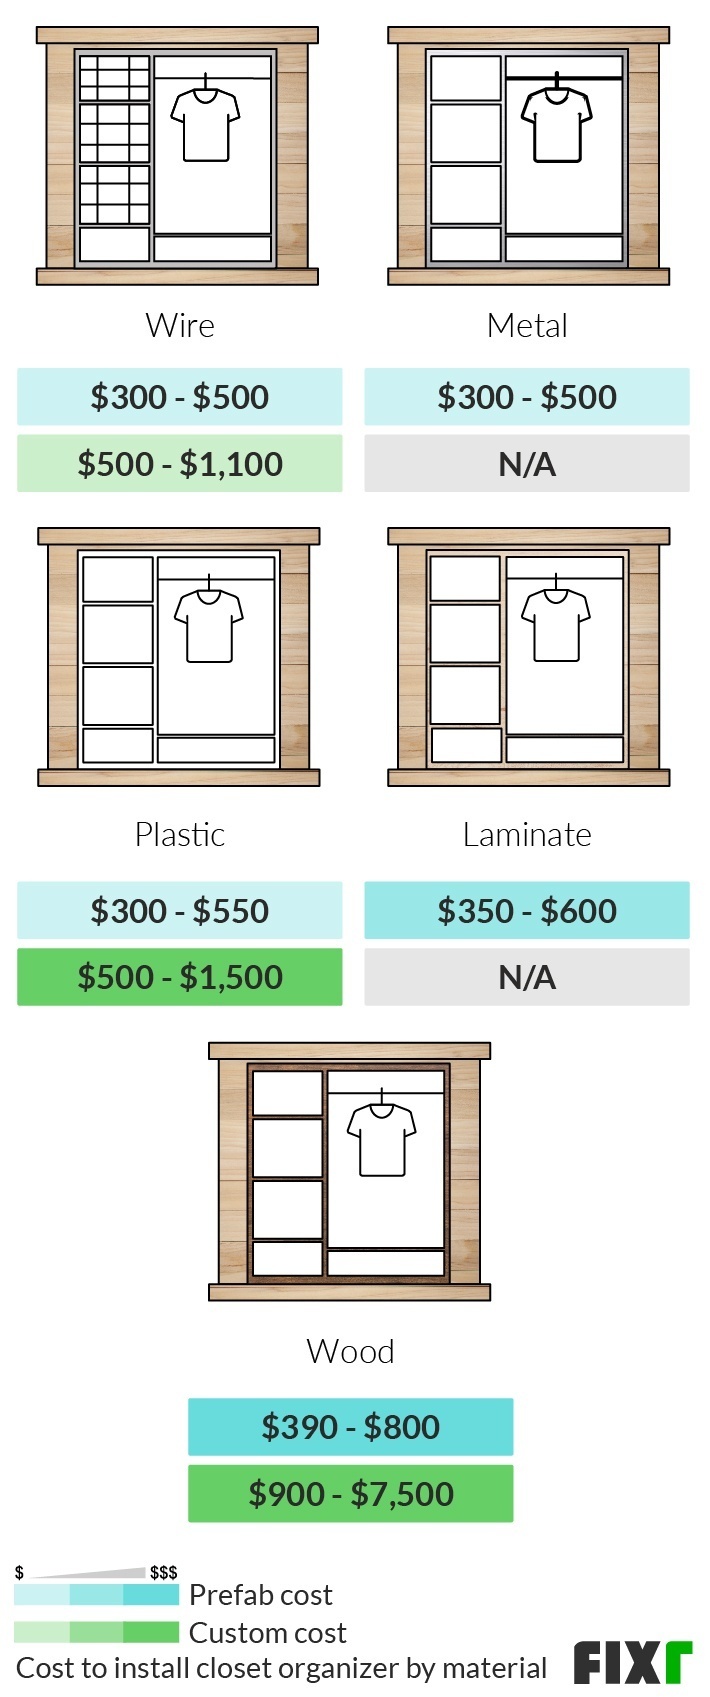 Cost of Prefab and Custom Wire, Metal, Plastic, Laminate, and Wood Closet Organizers